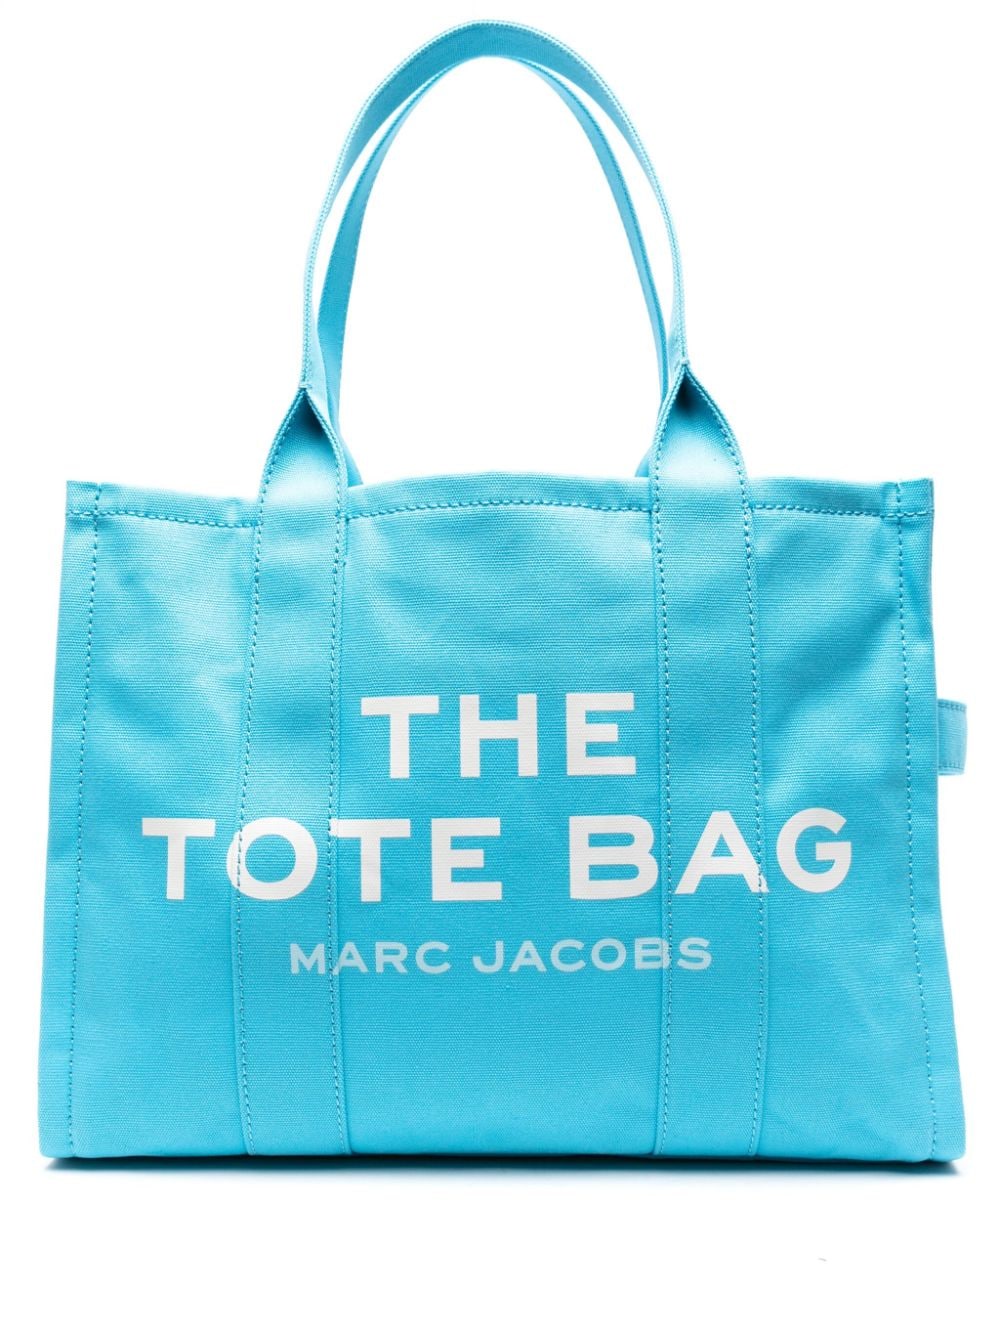 The Canvas Large Tote bag